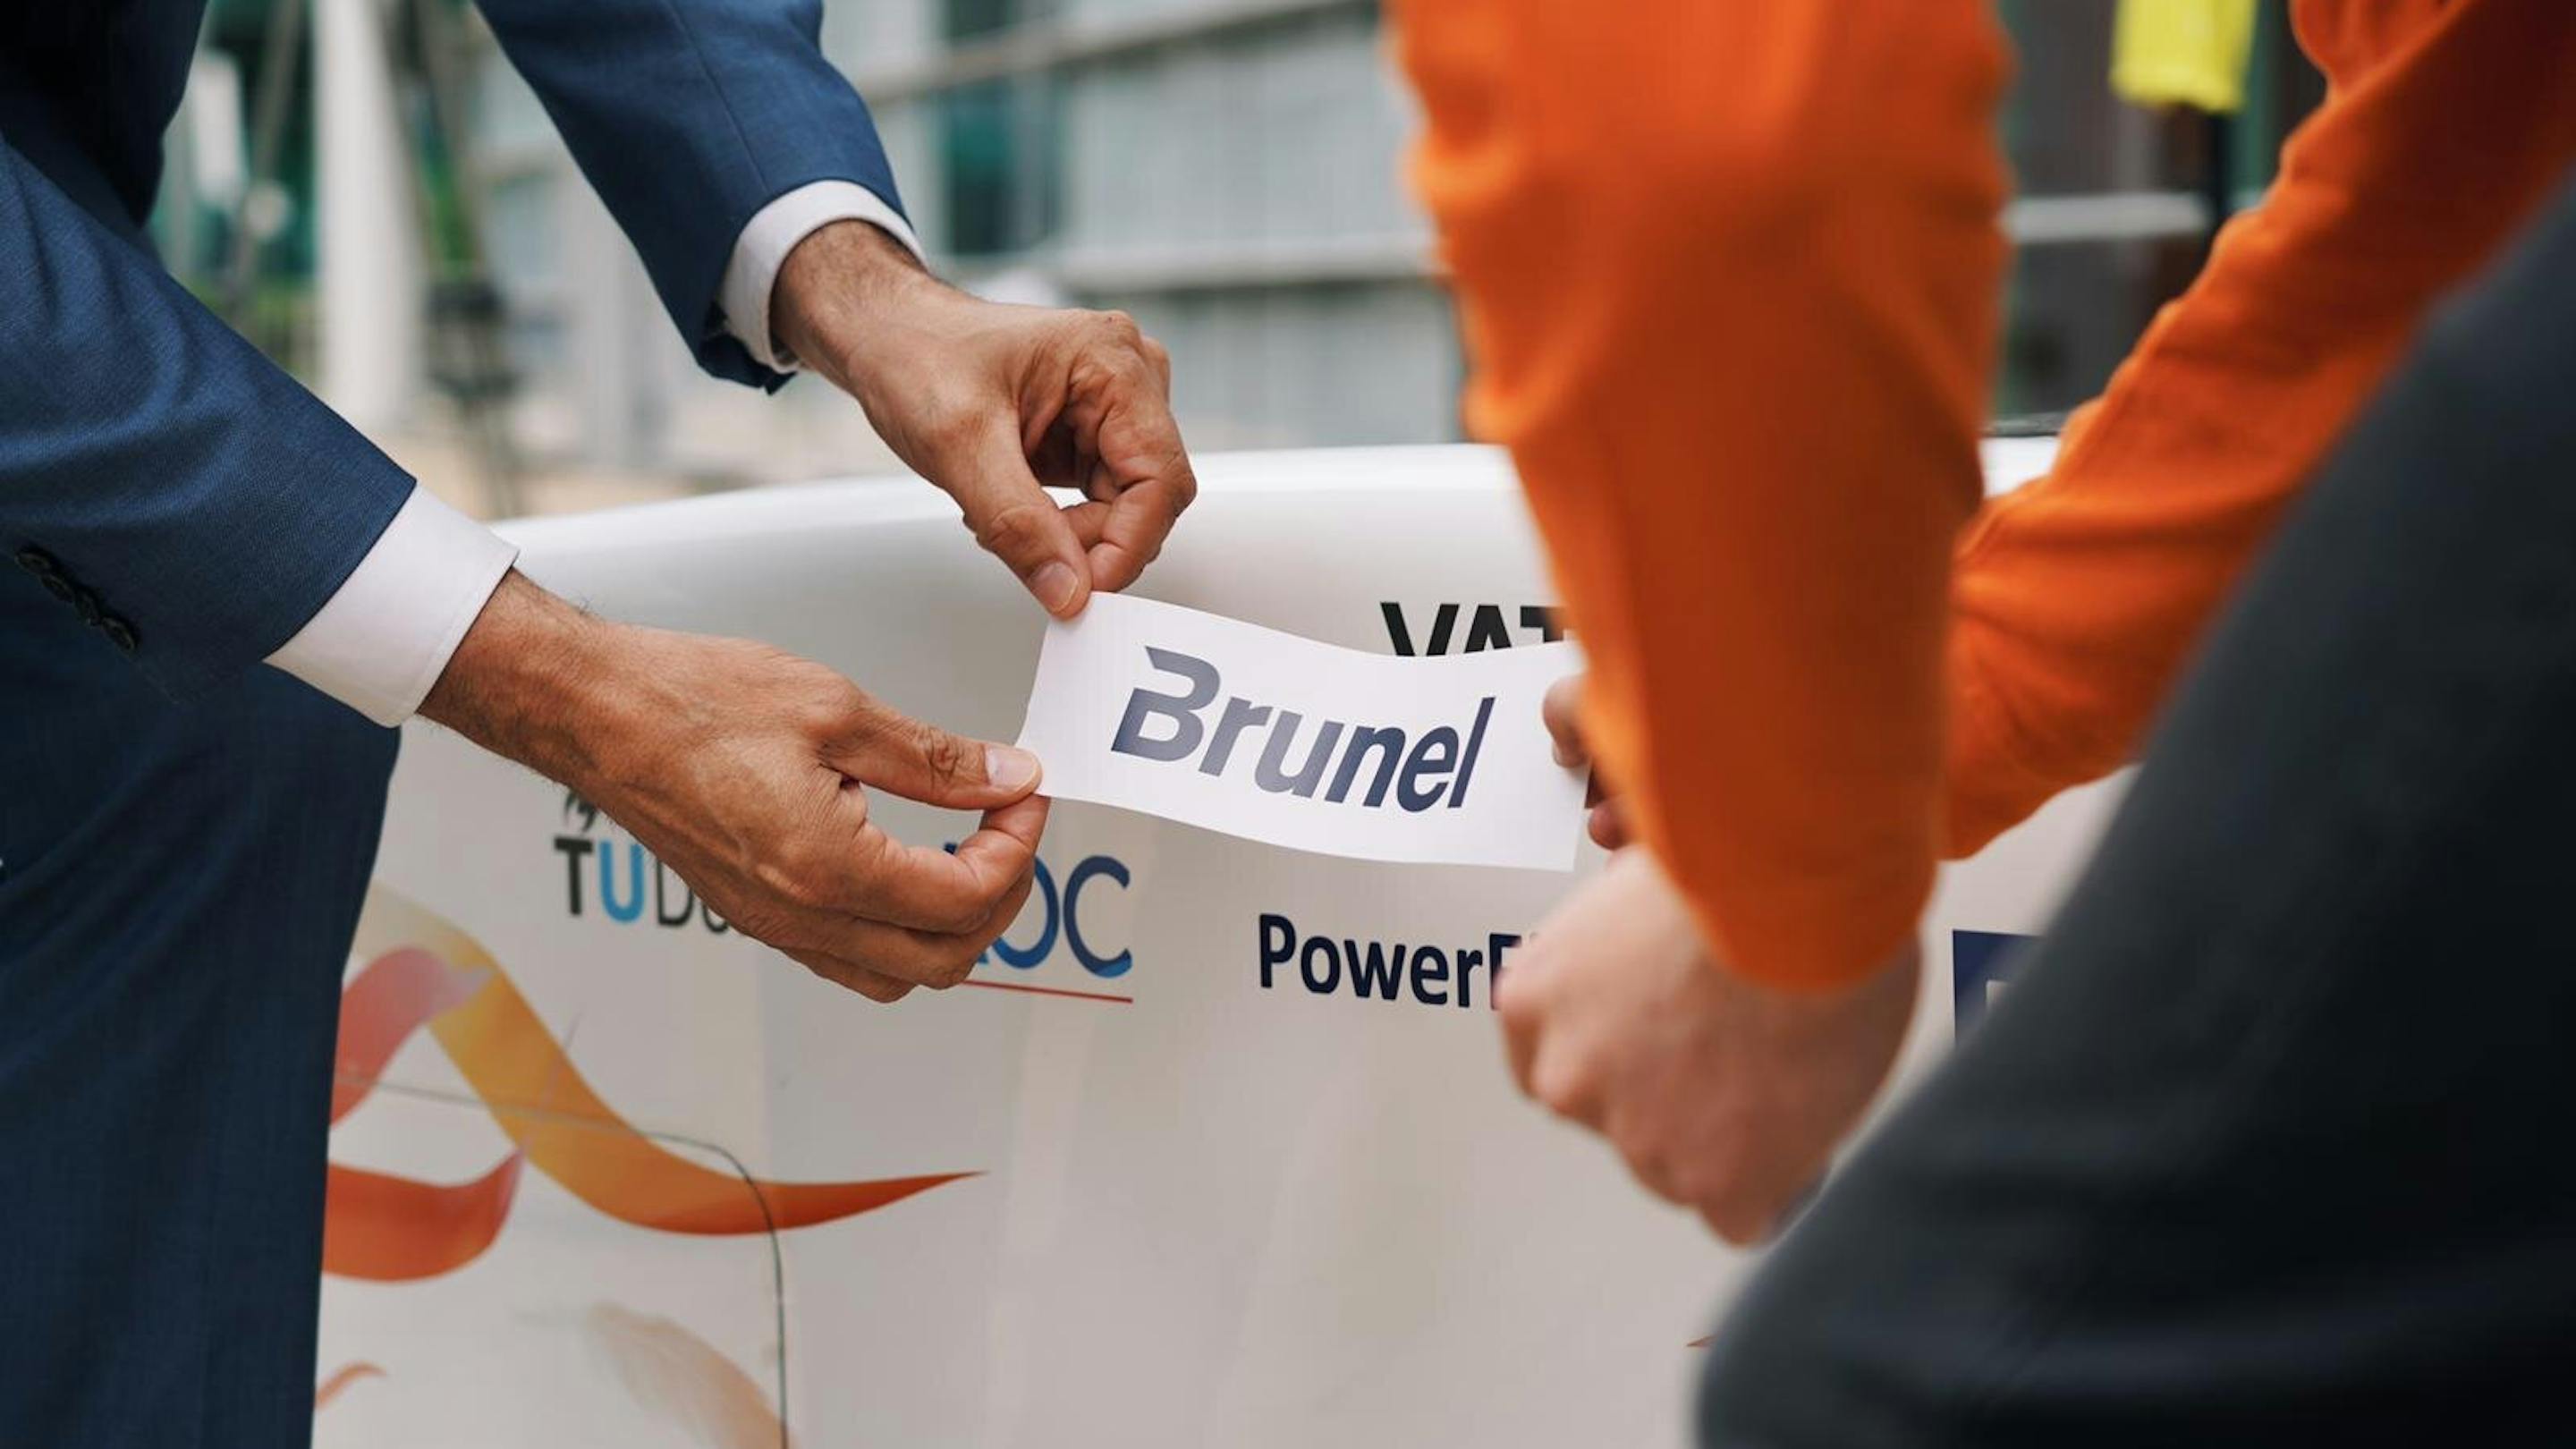 The logo of Brunel being placed on Nuna Phoenix